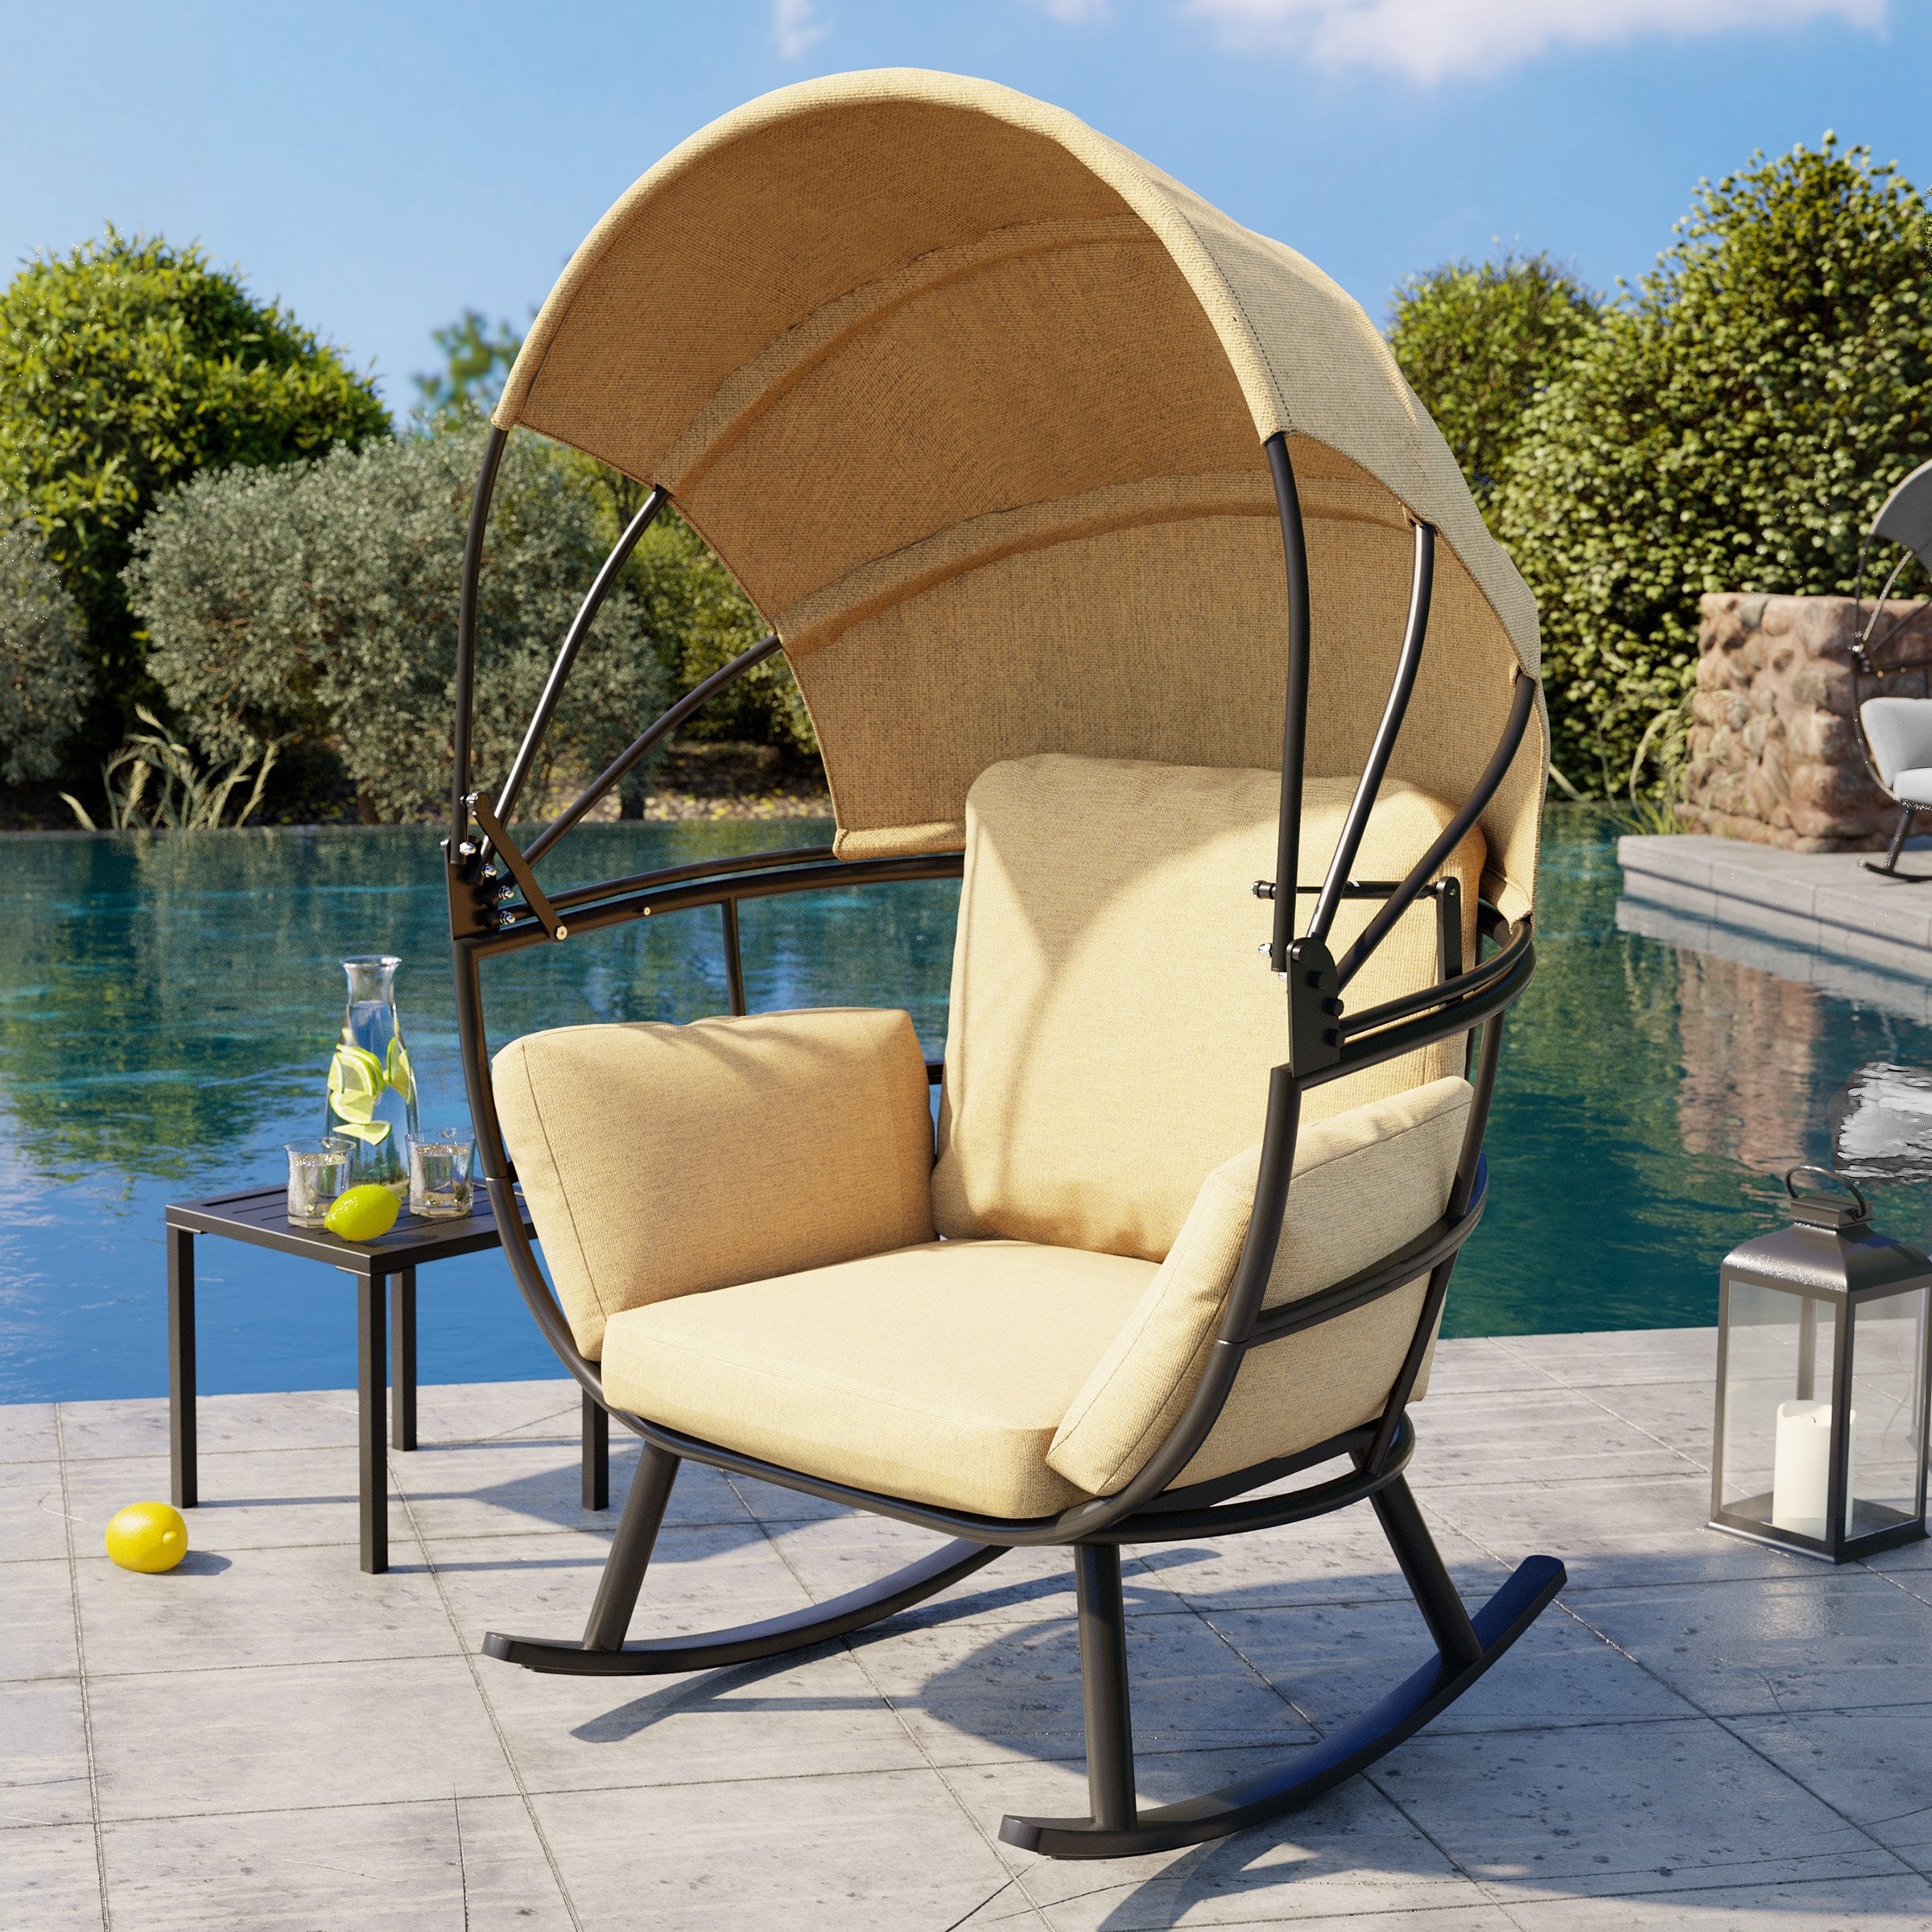 https://ak1.ostkcdn.com/images/products/is/images/direct/68db630a712bfa184c47c7bf31b070ddd8a94f90/Outdoor-Egg-Rocking-Chair-with-Foldable-Canopy-with-Cushion-by-Crestlive-Products.jpg